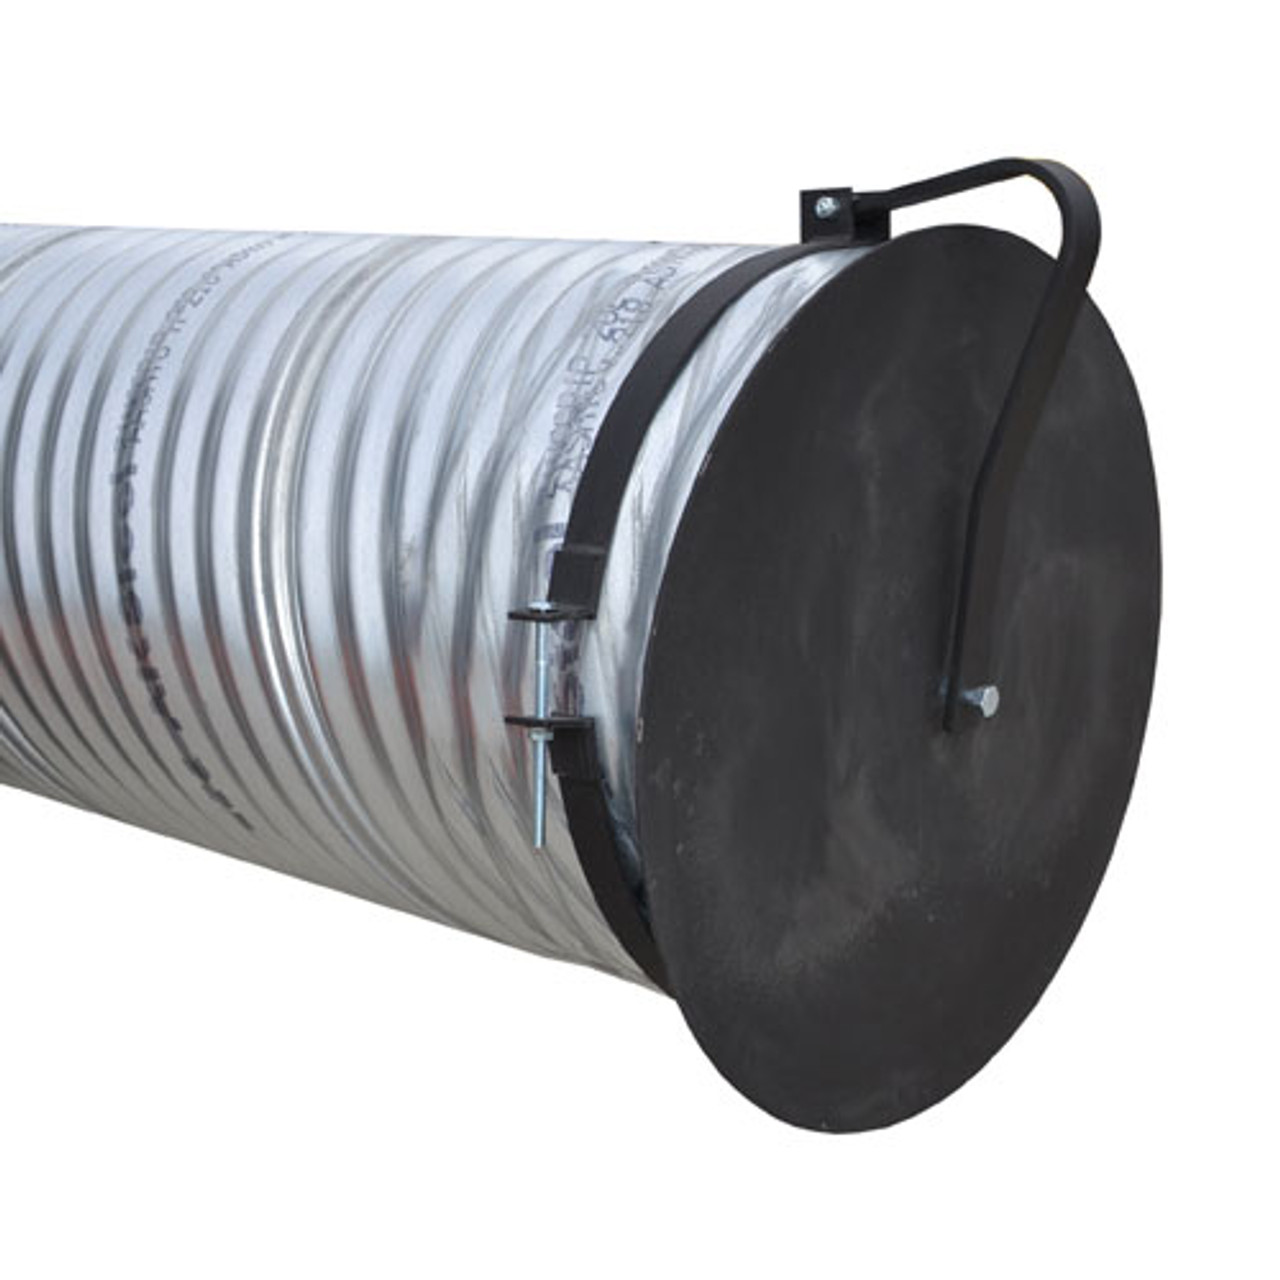 Flap Gate 30" Standard The Drainage Products Store